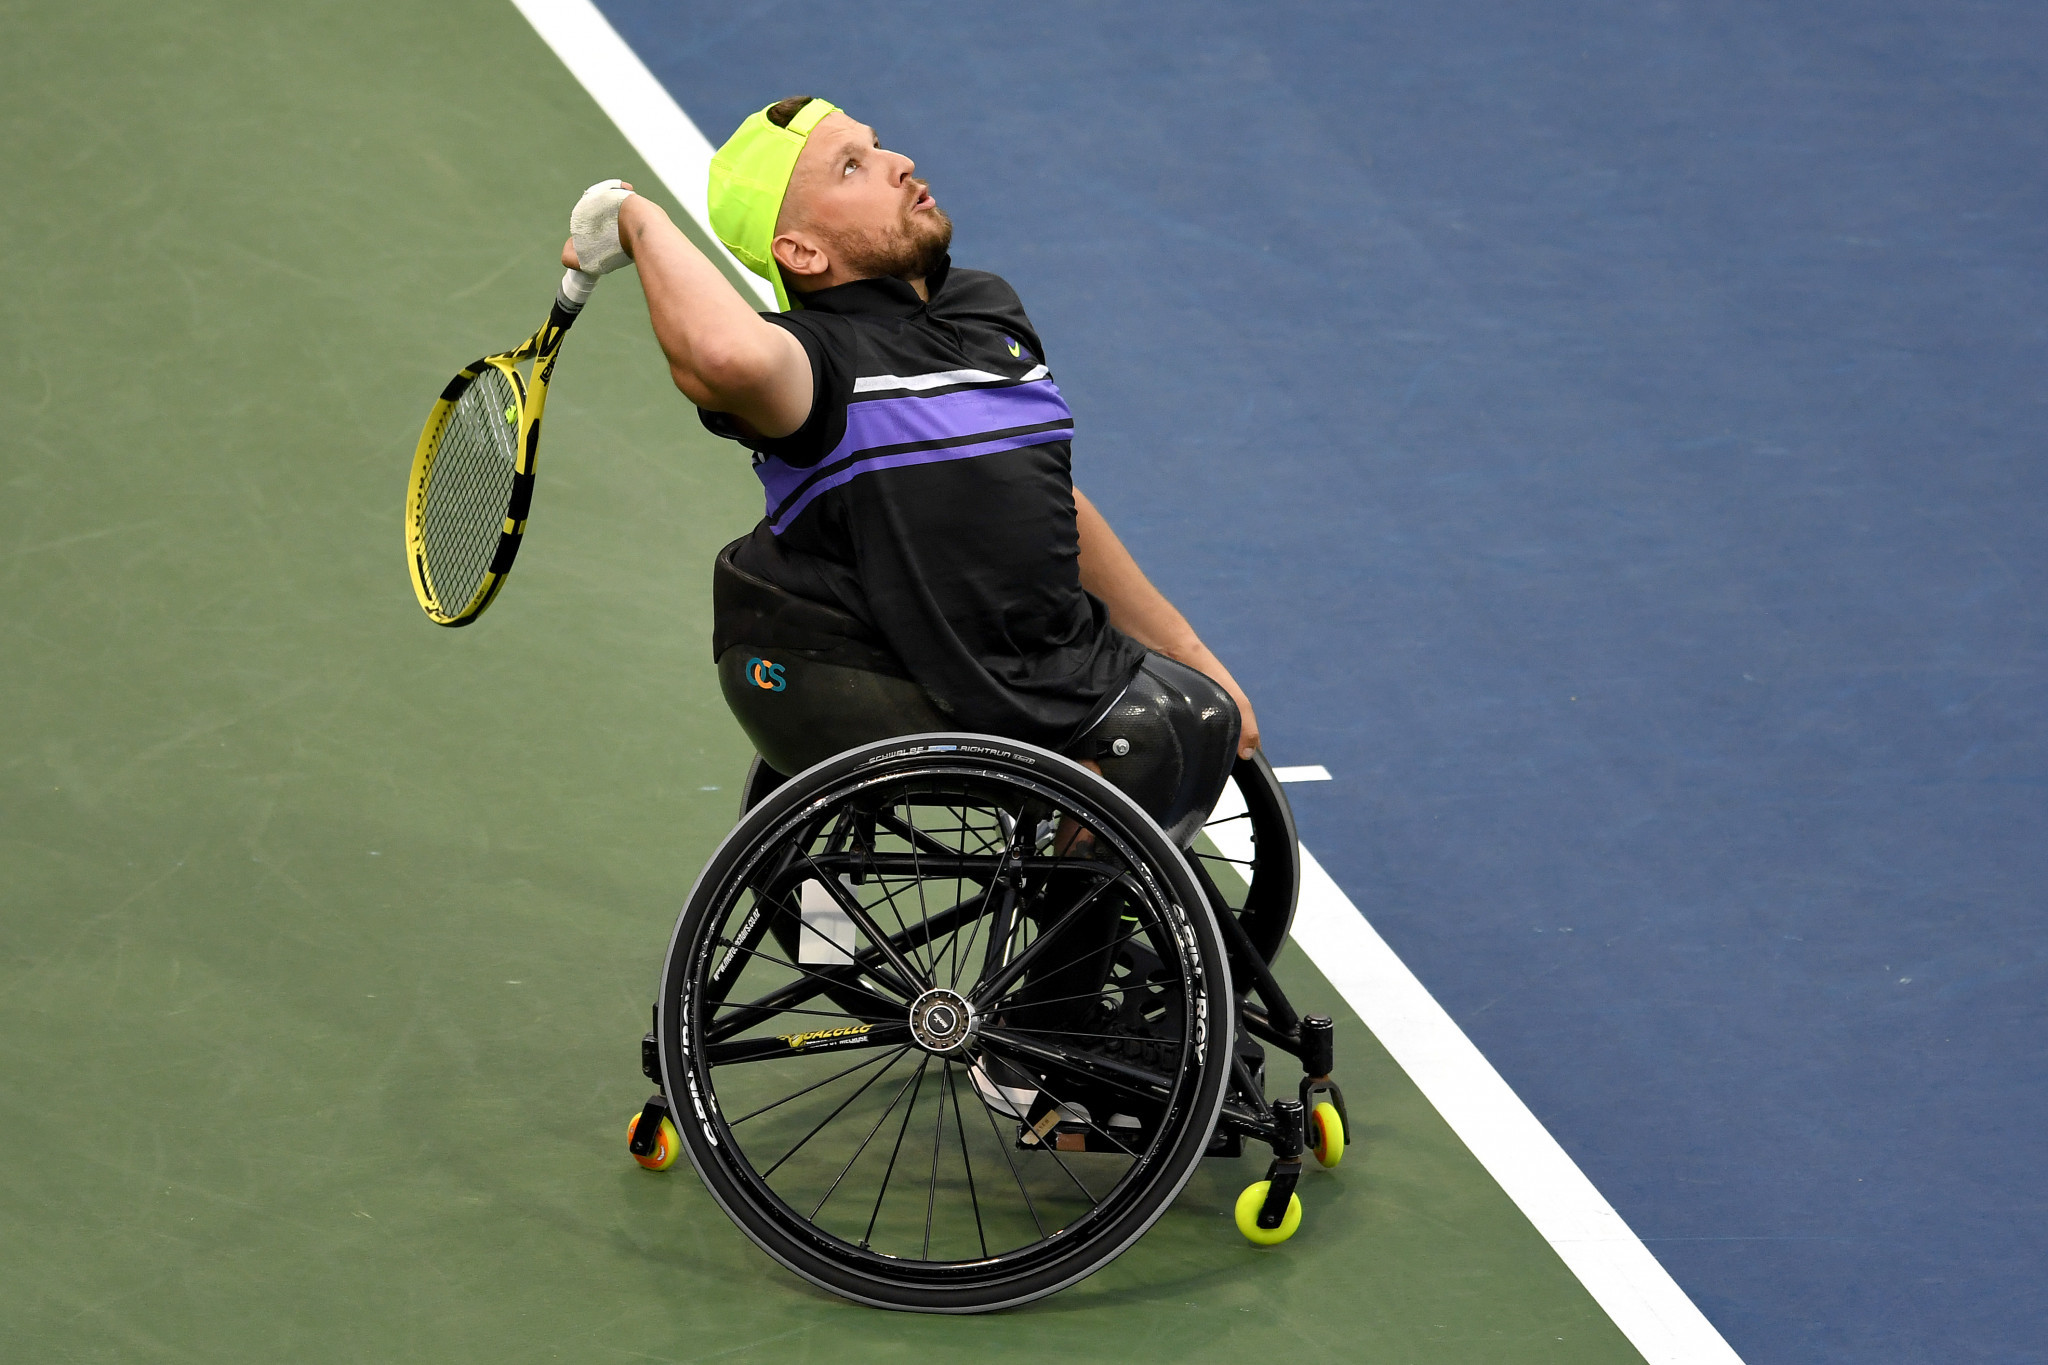 Australia's Dylan Alcott is in the hunt to win the first calendar Grand Slam in quad tennis history ©Getty Images